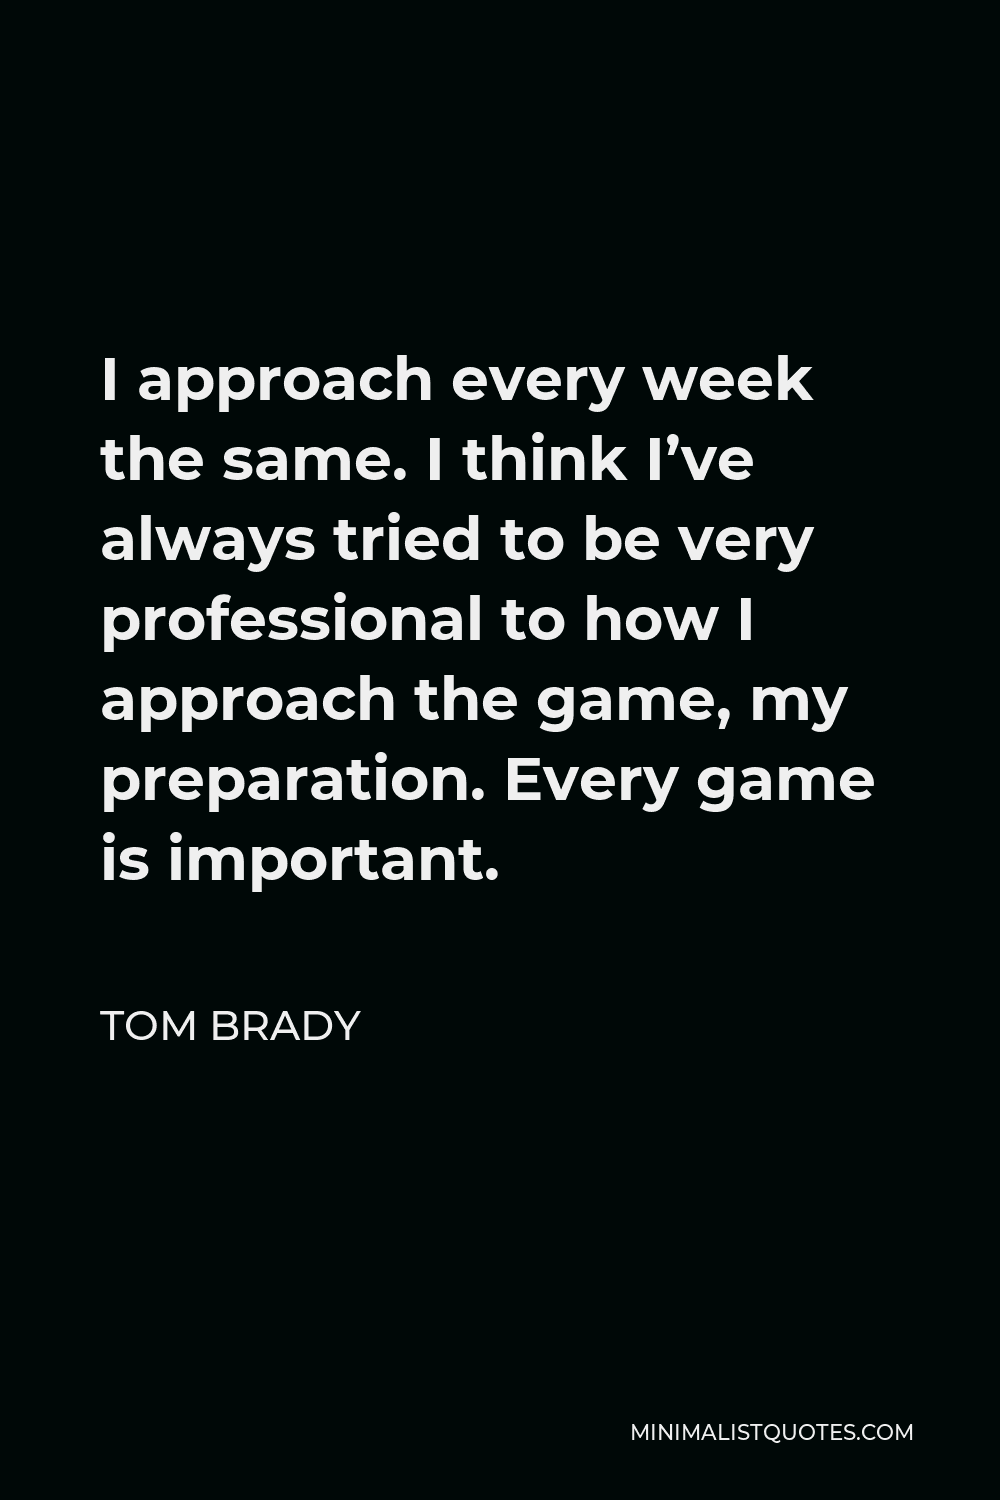 Tom Brady Quote - I approach every week the same. I think I’ve always tried to be very professional to how I approach the game, my preparation. Every game is important.